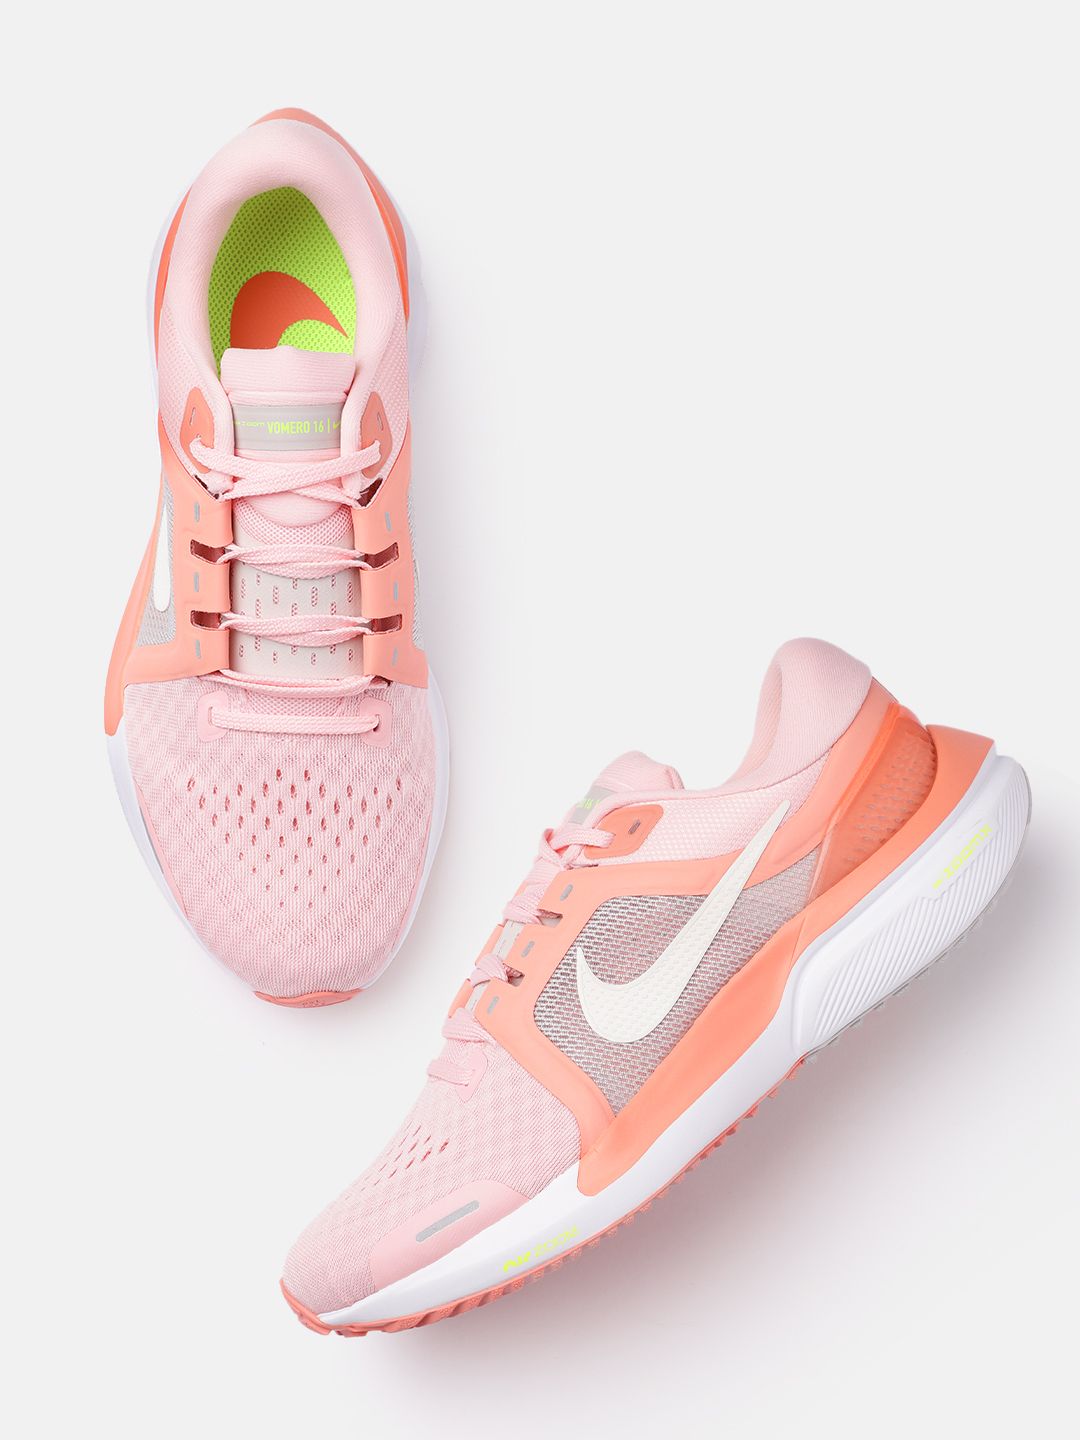 Nike Women Peach-Coloured Air Zoom Vomero 16 Running Shoes Price in India